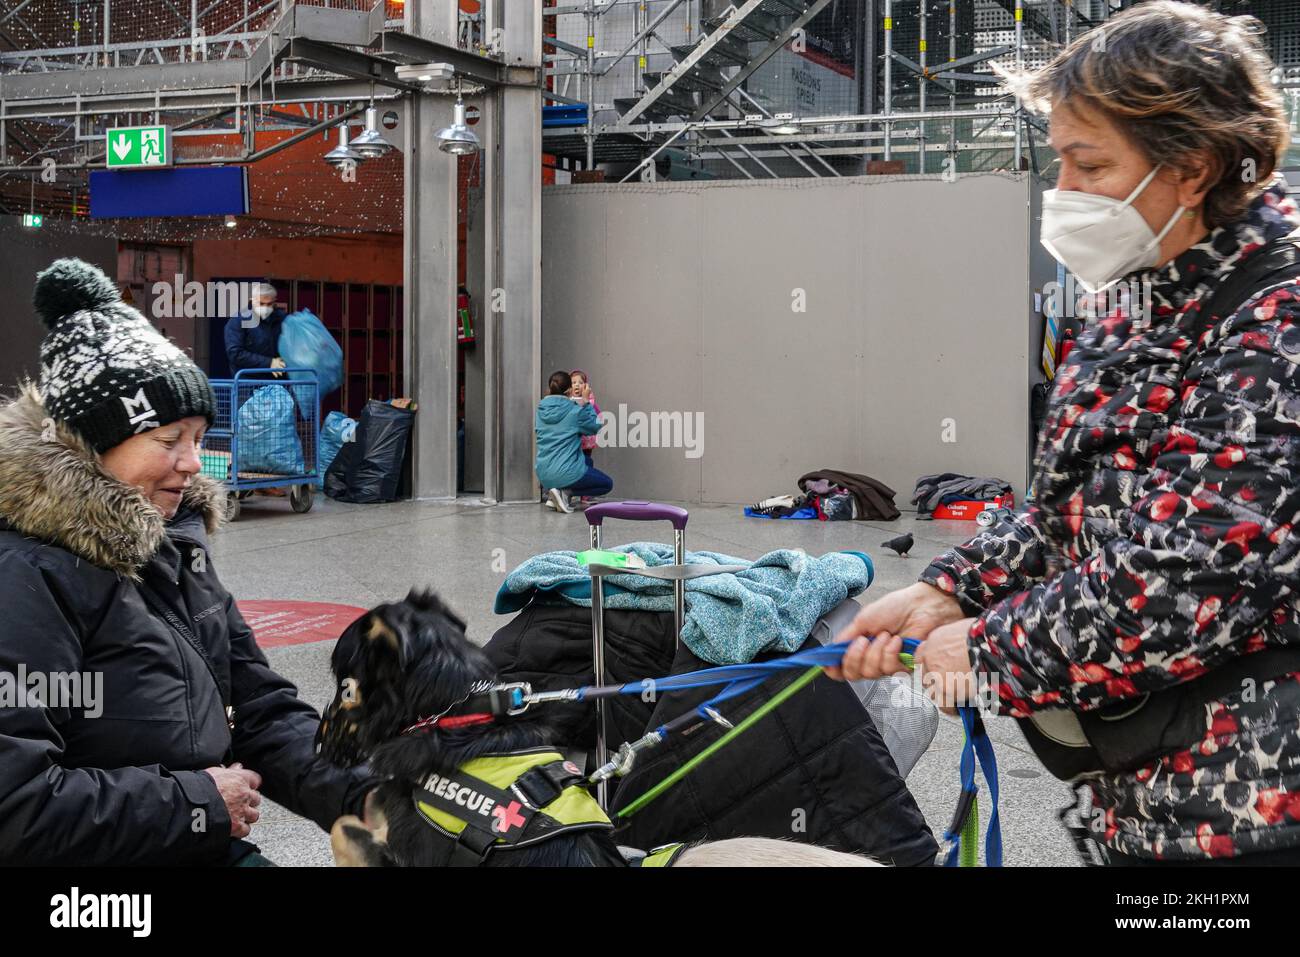 Two women from Ukraine arrived with their rescue dog at Munich central station.The dog is wearing a muzzle. He is sitting on a woman's lap with two paws. Stock Photo